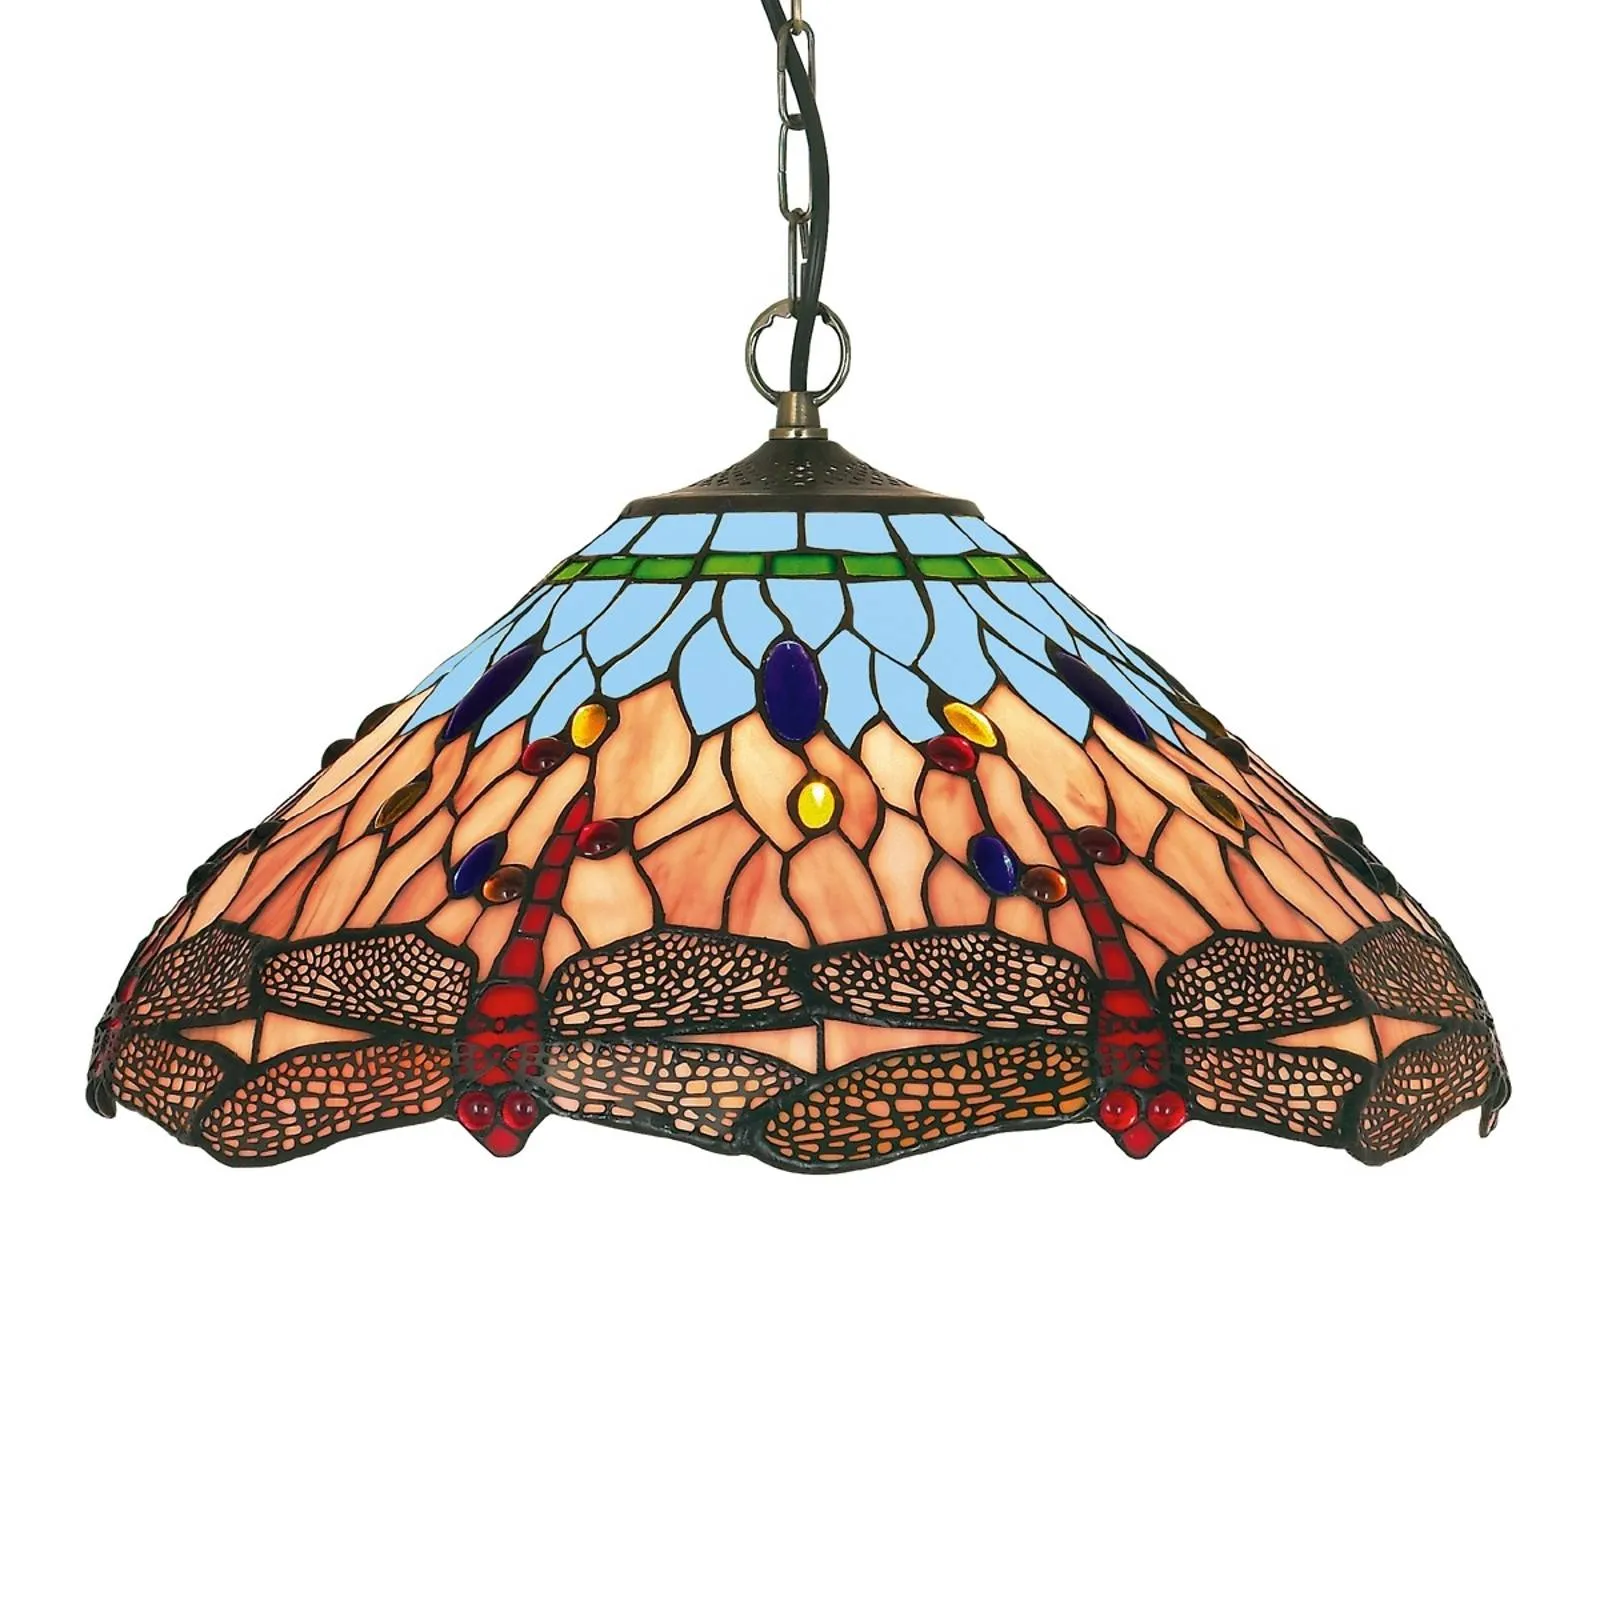 Classic Tiffany-style Dragonfly hanging light